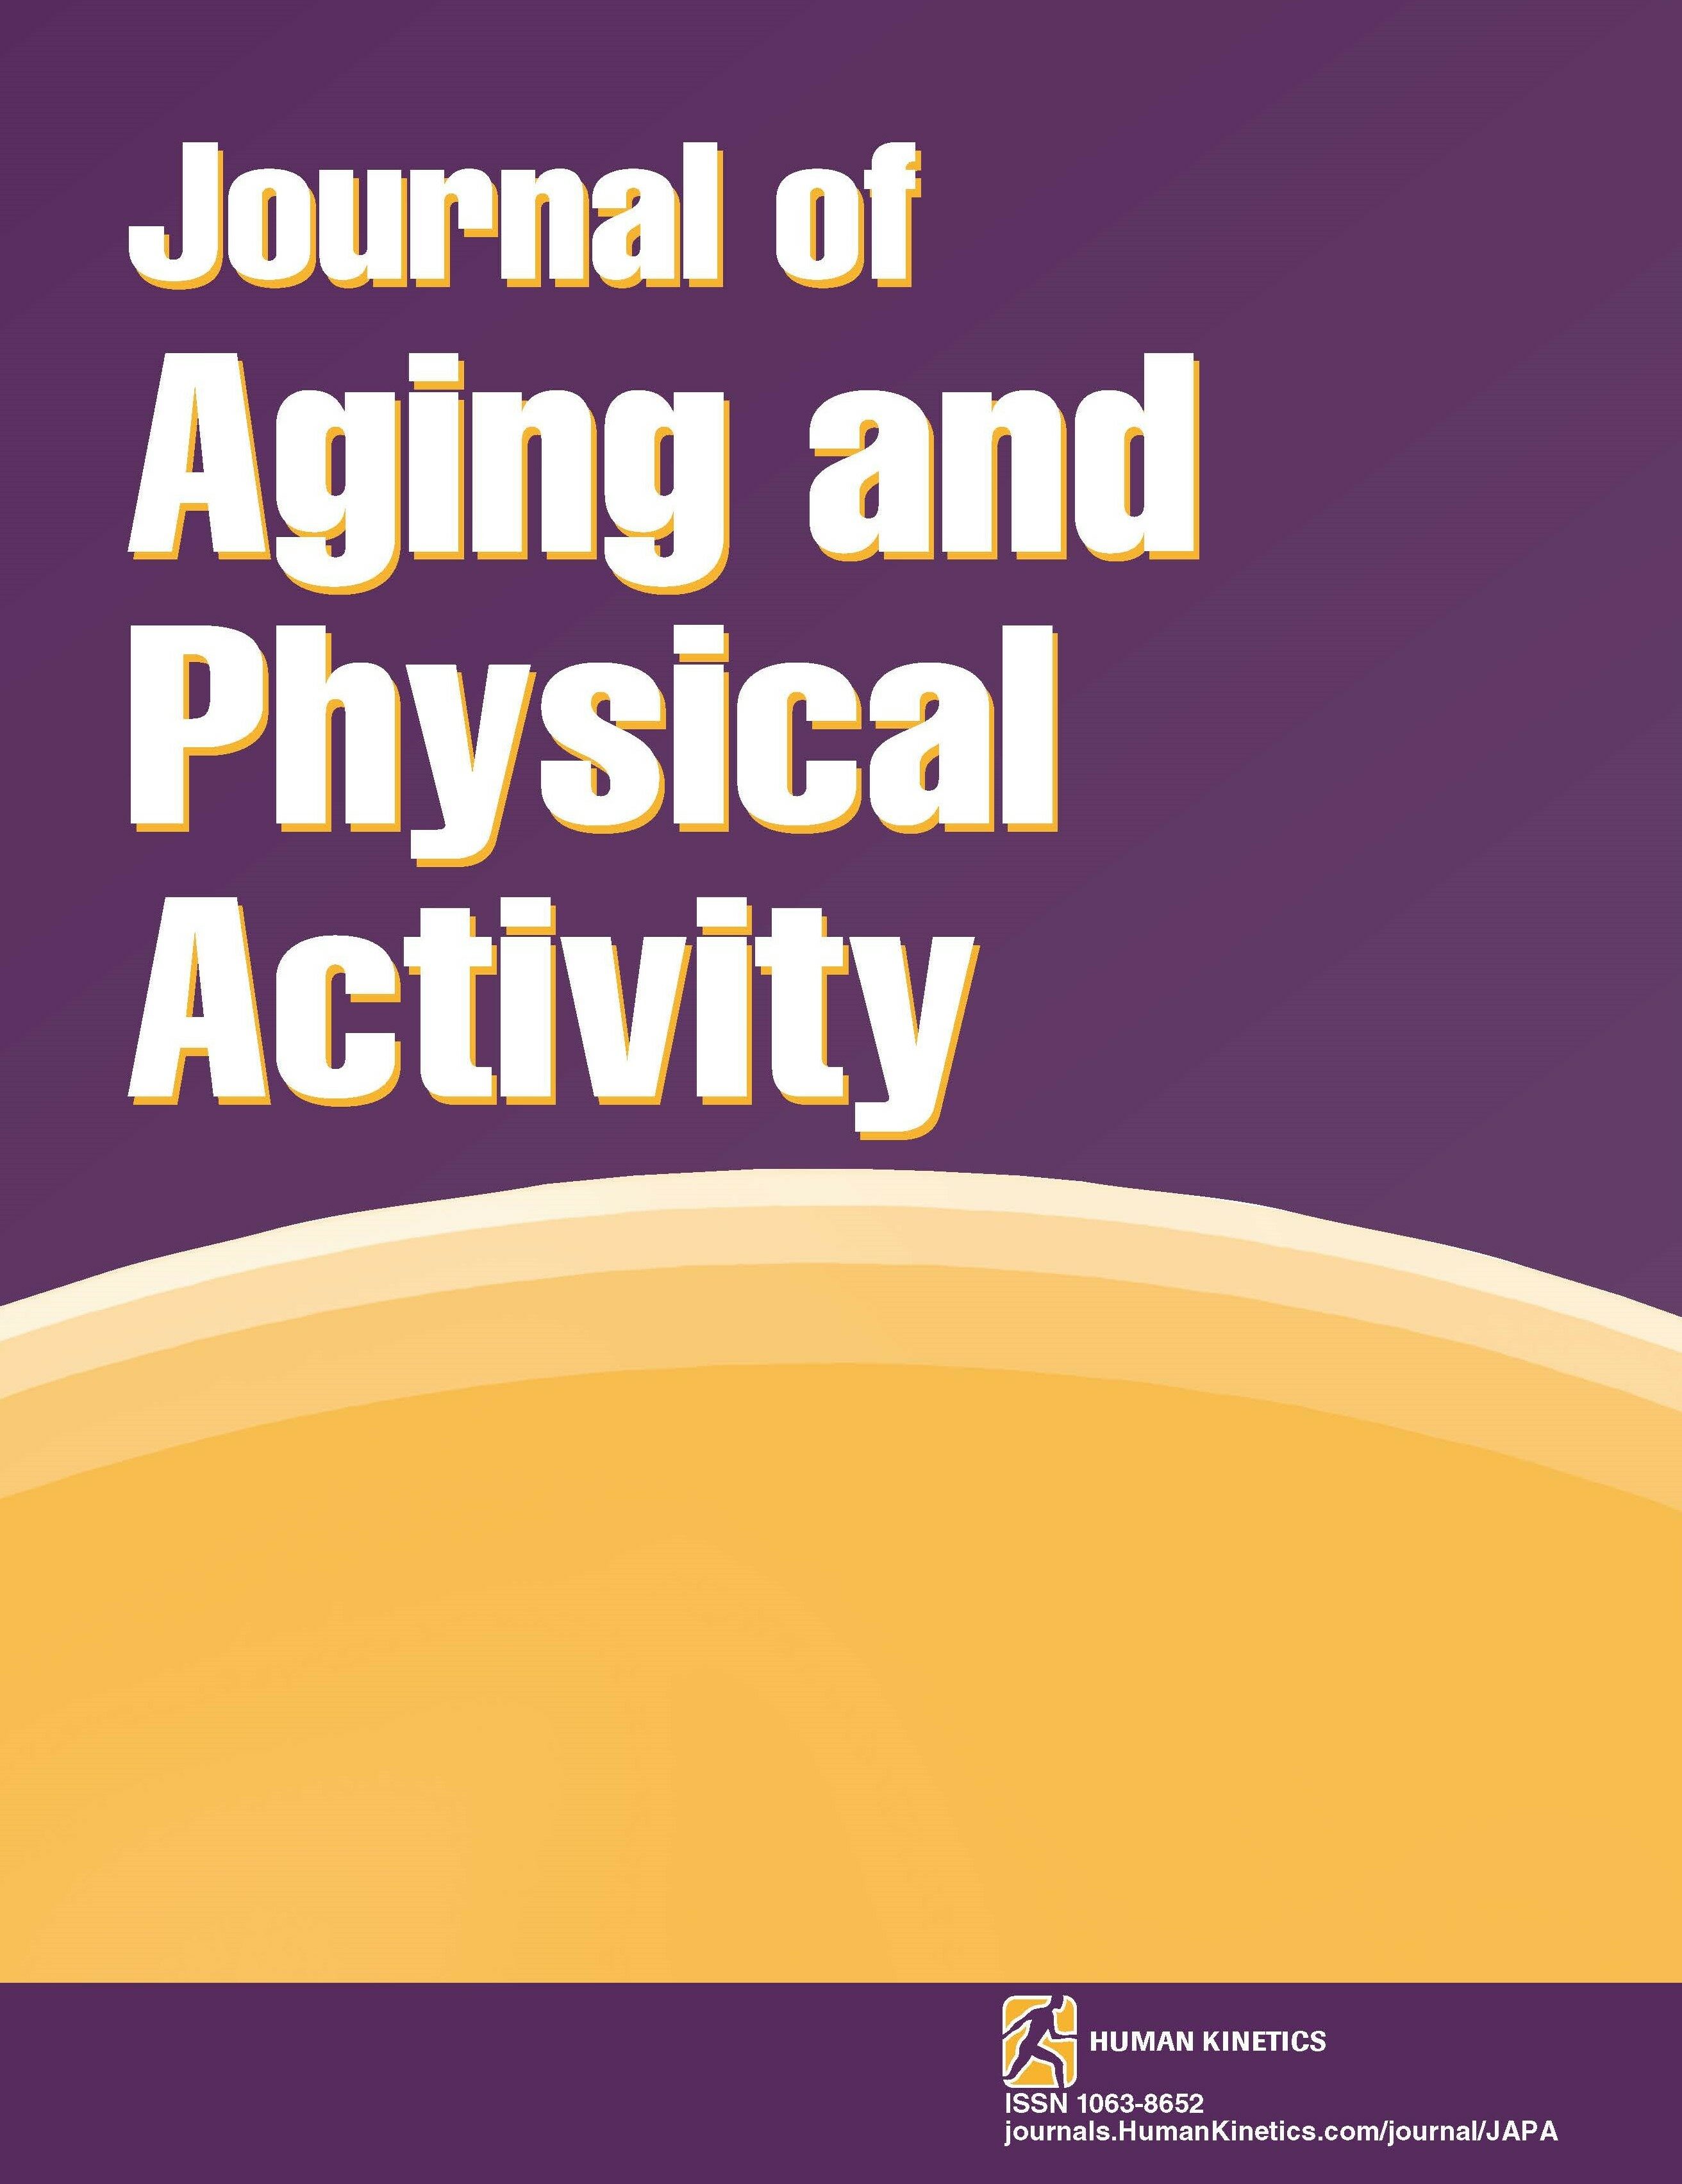 Physical Activity Inclusion in Dementia-Friendly Communities: A Mixed Methods Study